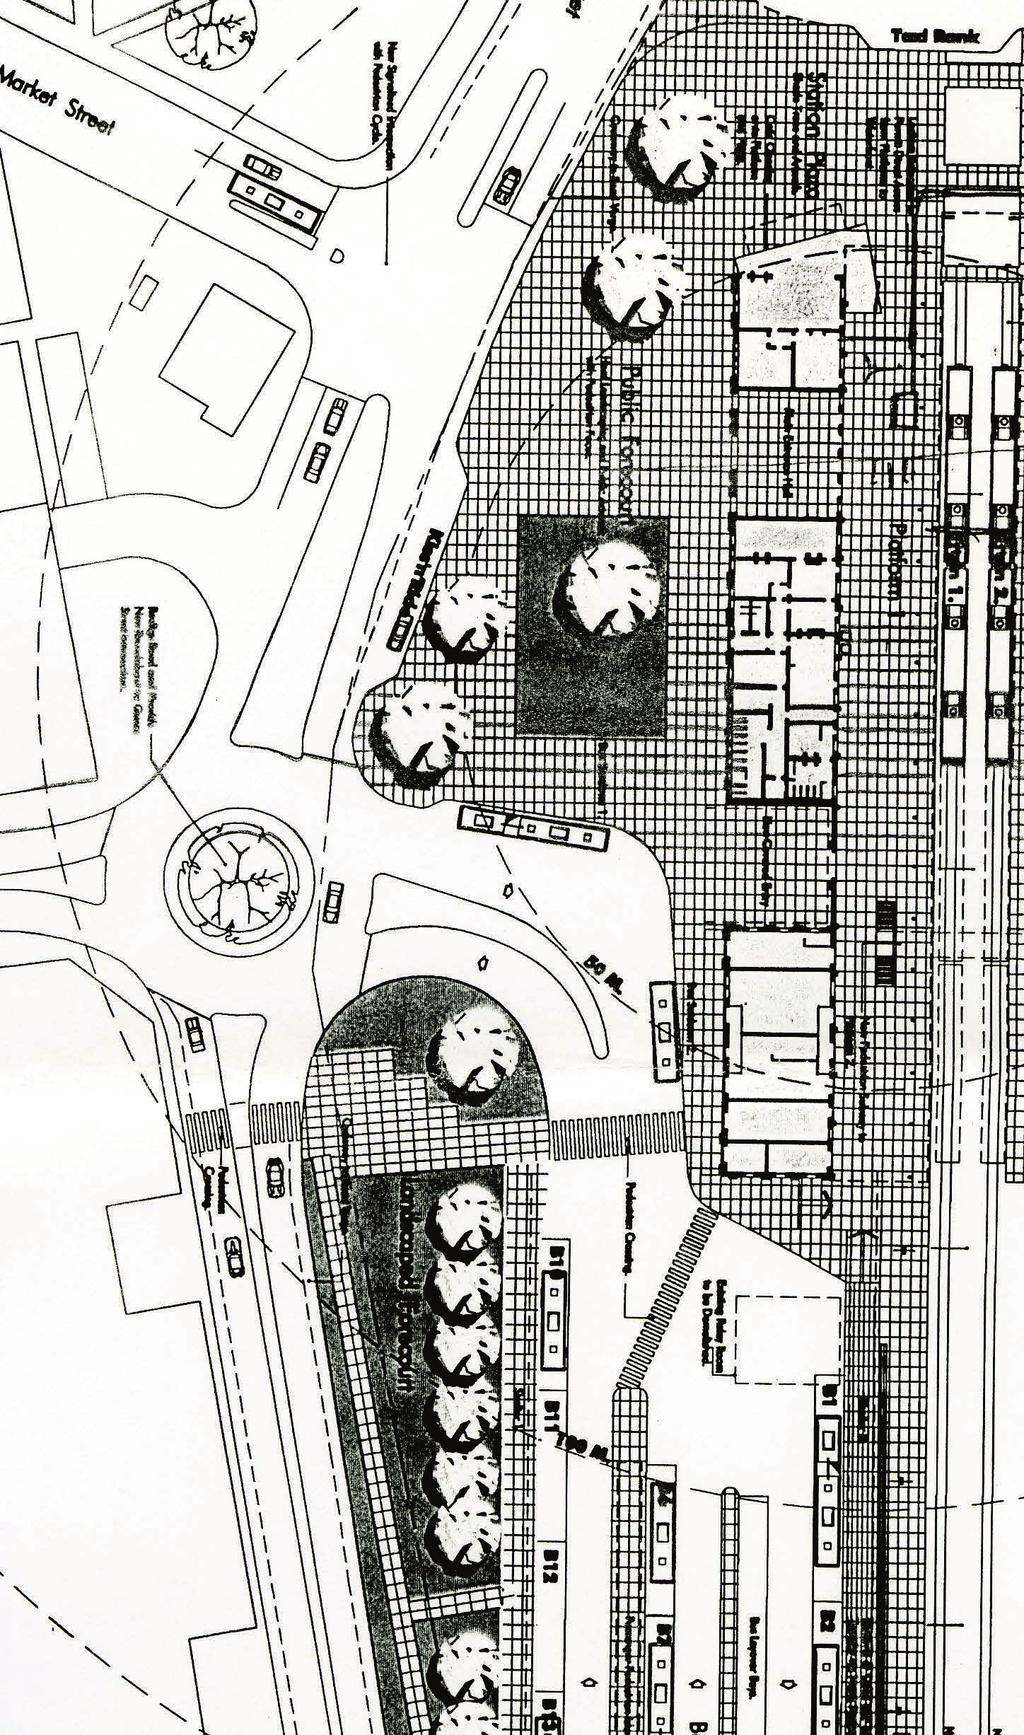 11. Top: Queen Street access: Bus interchange concept by Fremantle Council officers 1999 (Ian James and Michael Willicombe) Above: Queen Street access: Cox